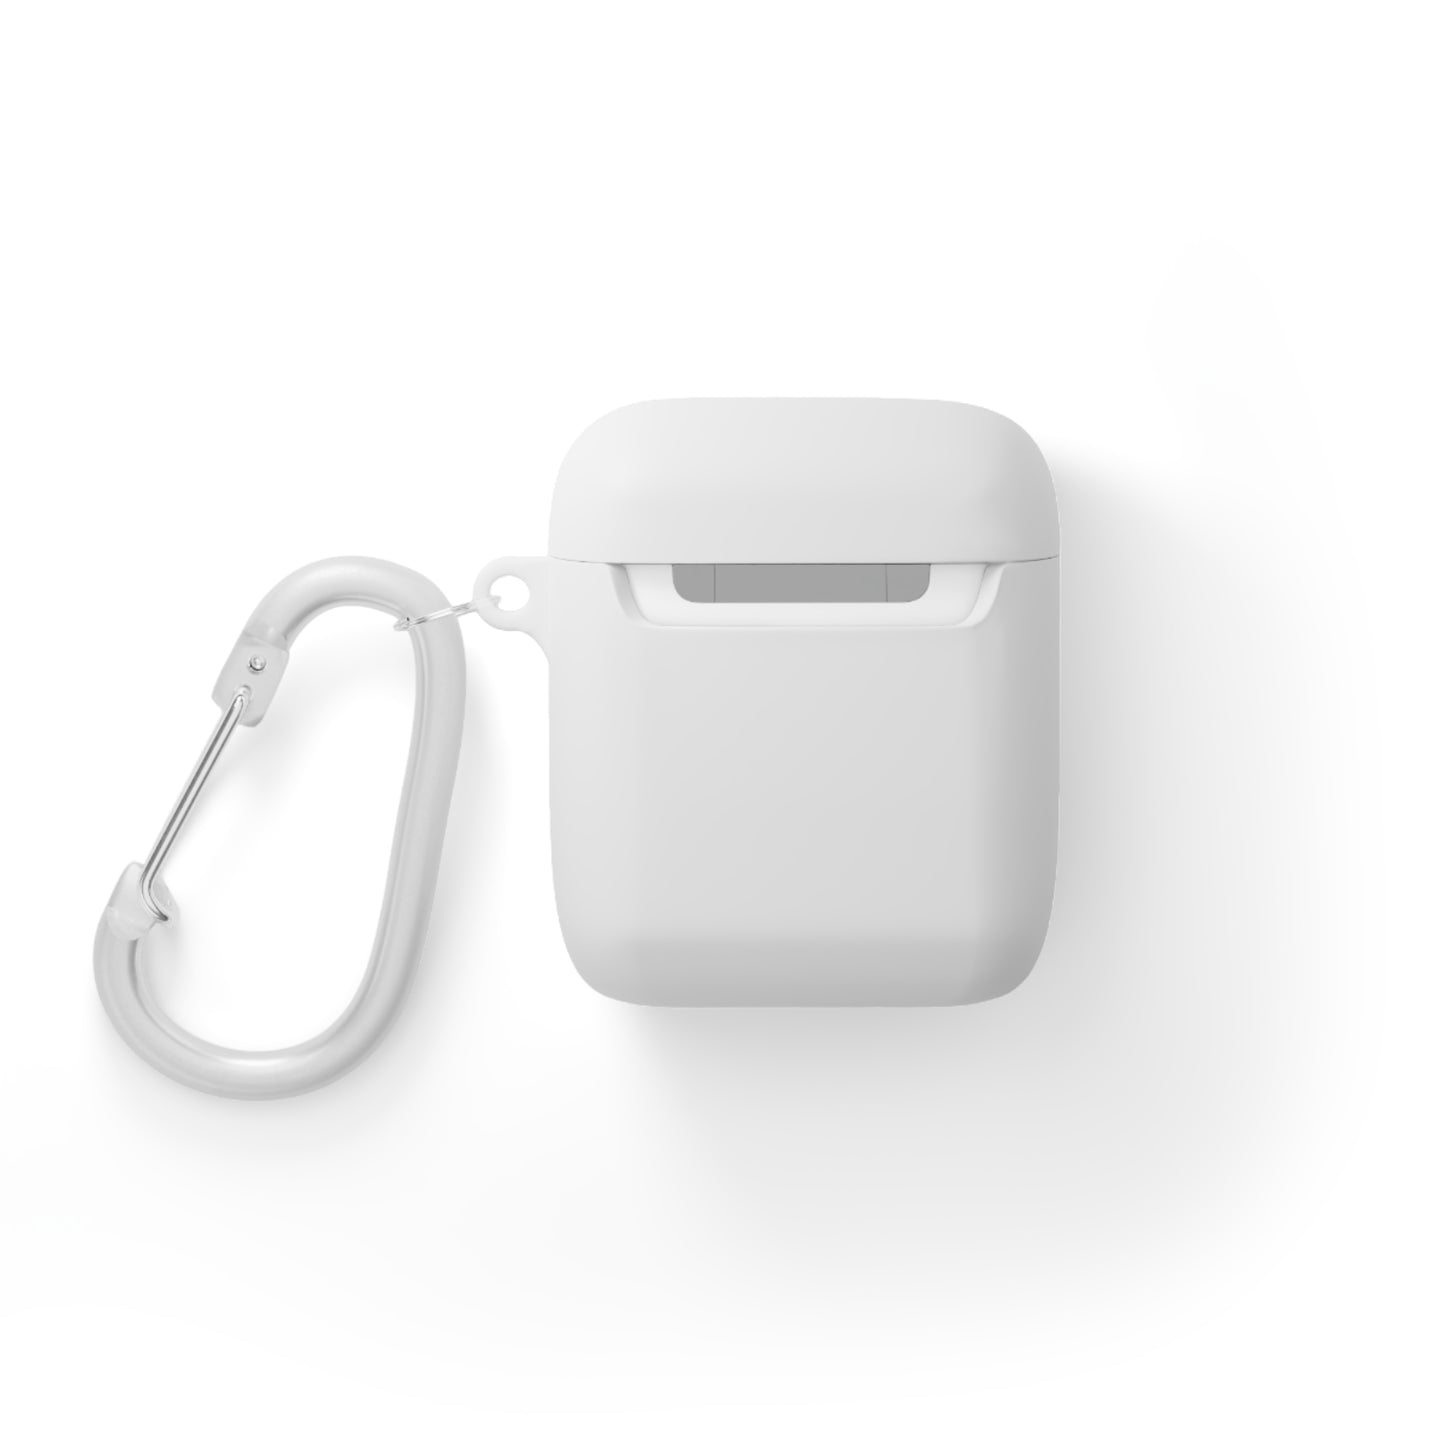 CS Vienne AirPods and AirPods Pro Case Cover